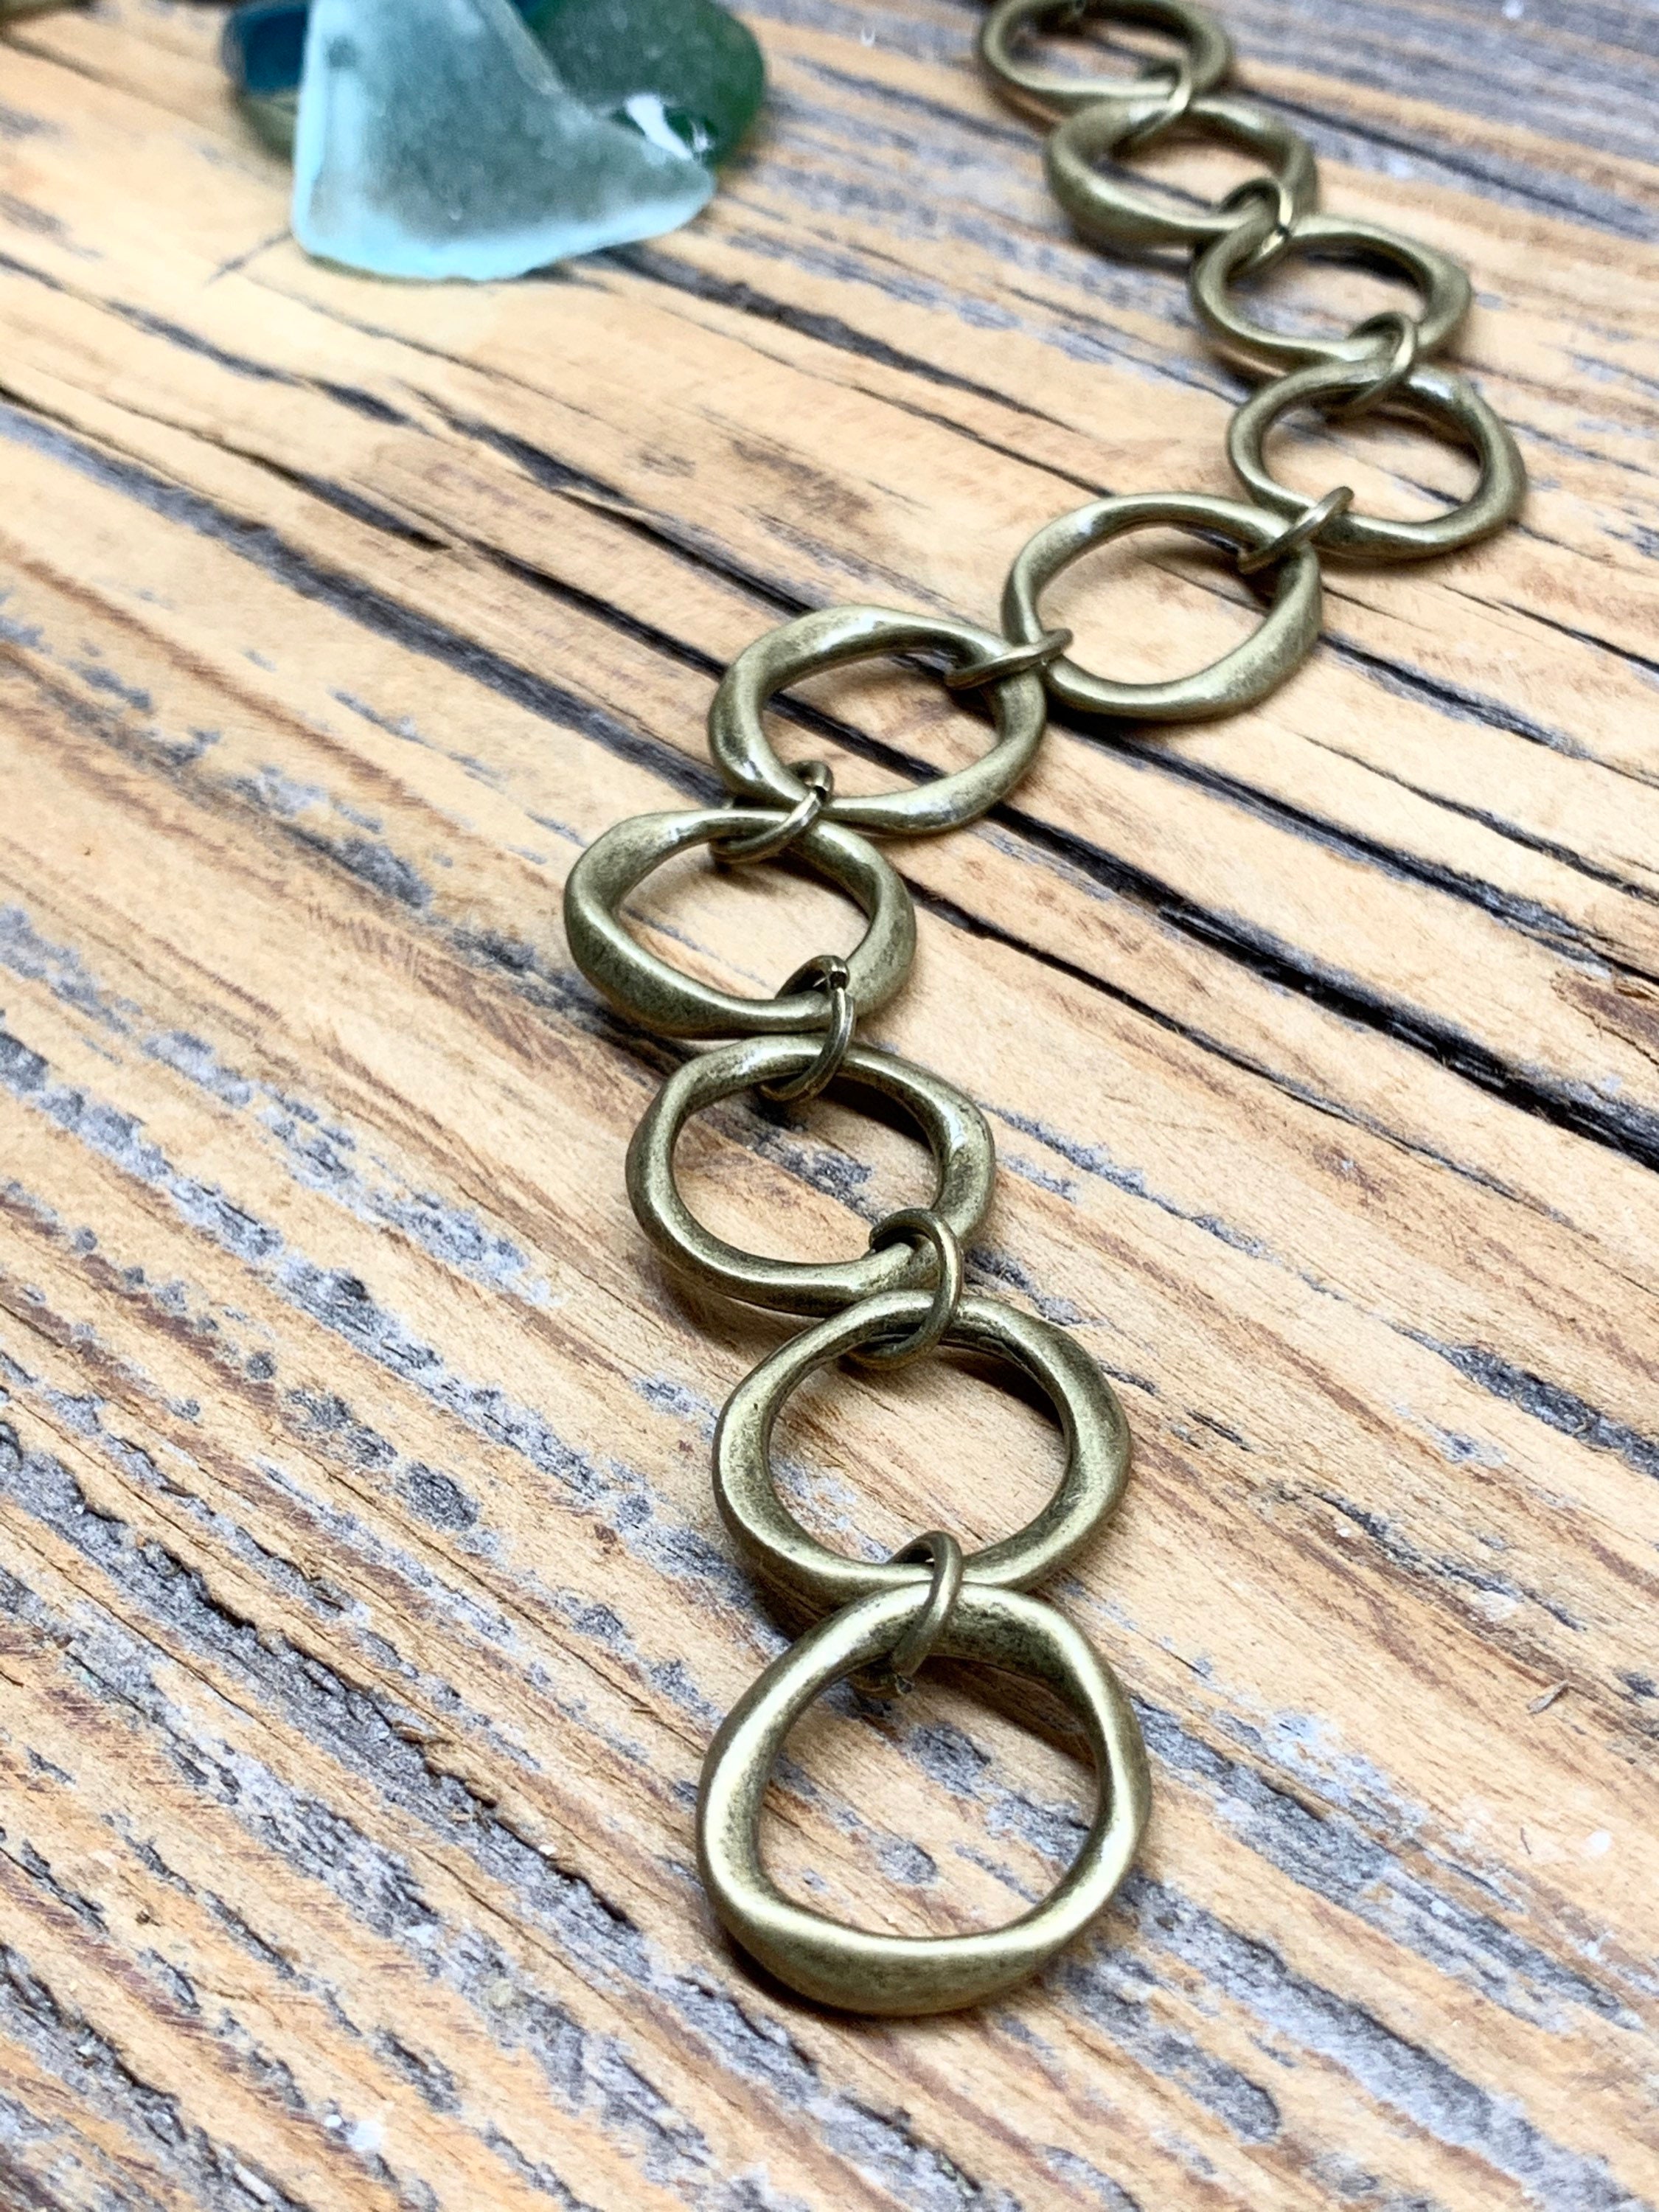 LAELIUS Antiques – Vintage 14k Gold Large Oval Link Chain